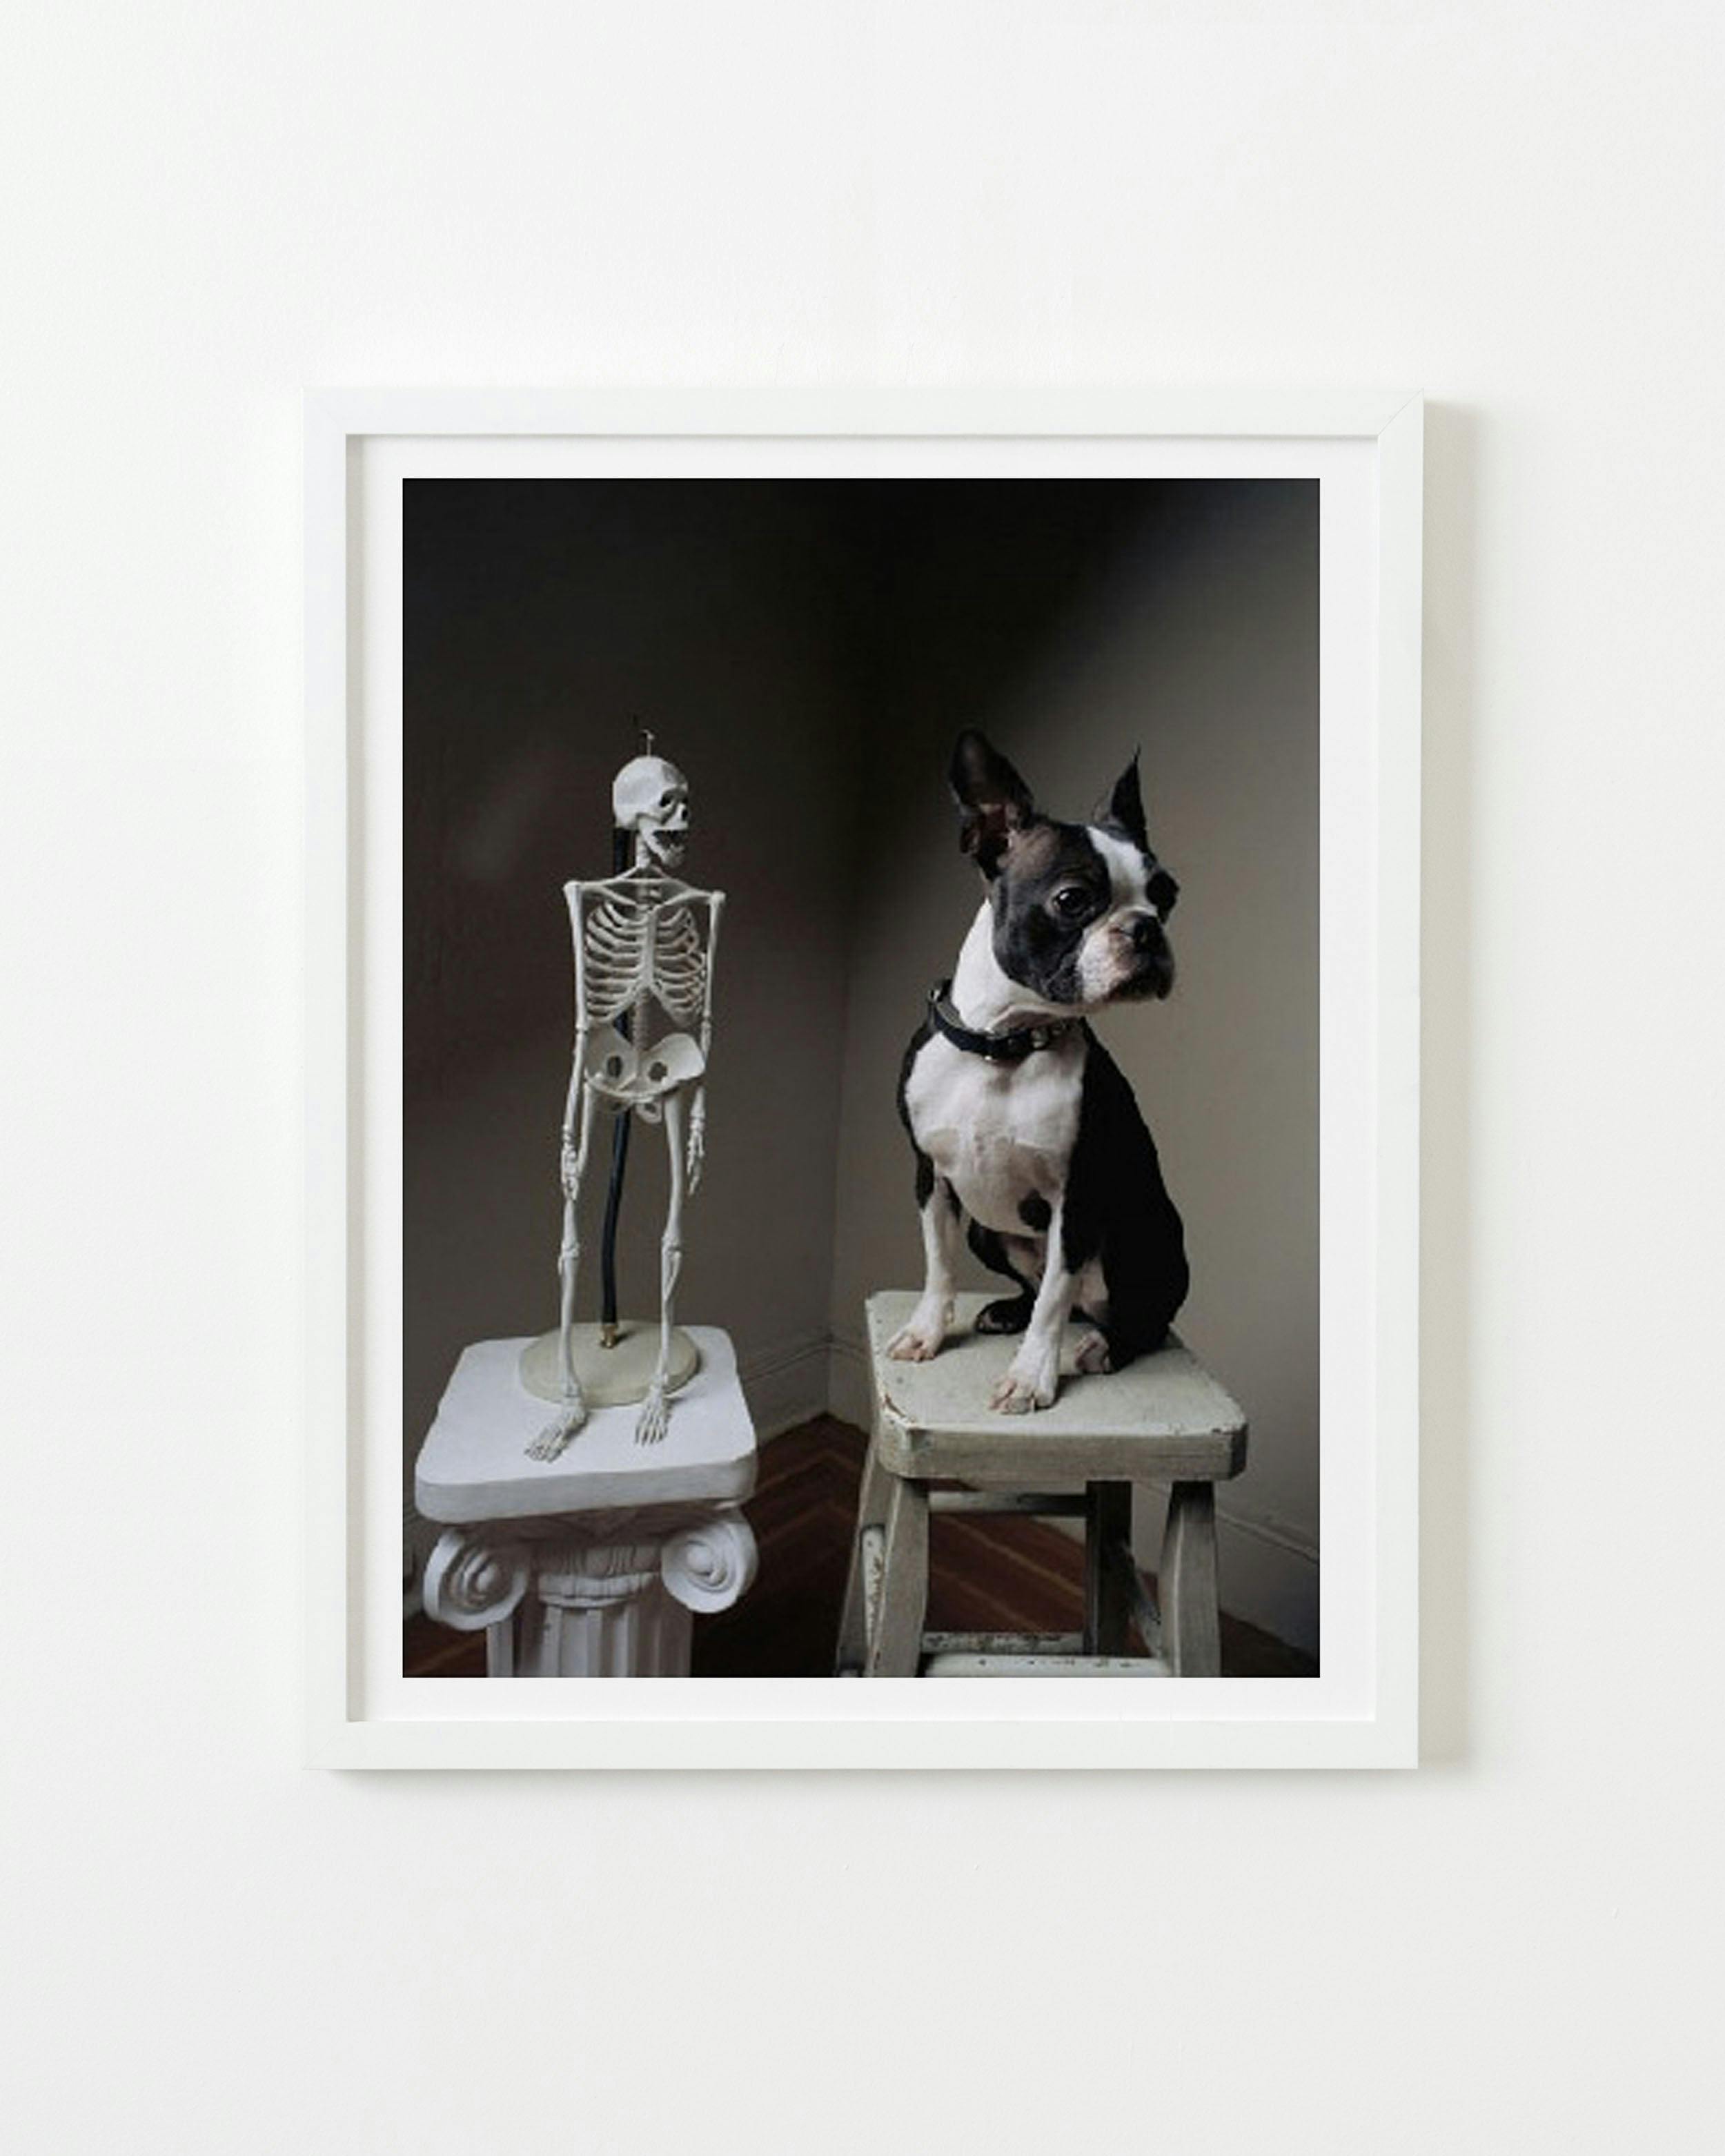 Photography by Michael Northrup titled "Sid with Skeleton".